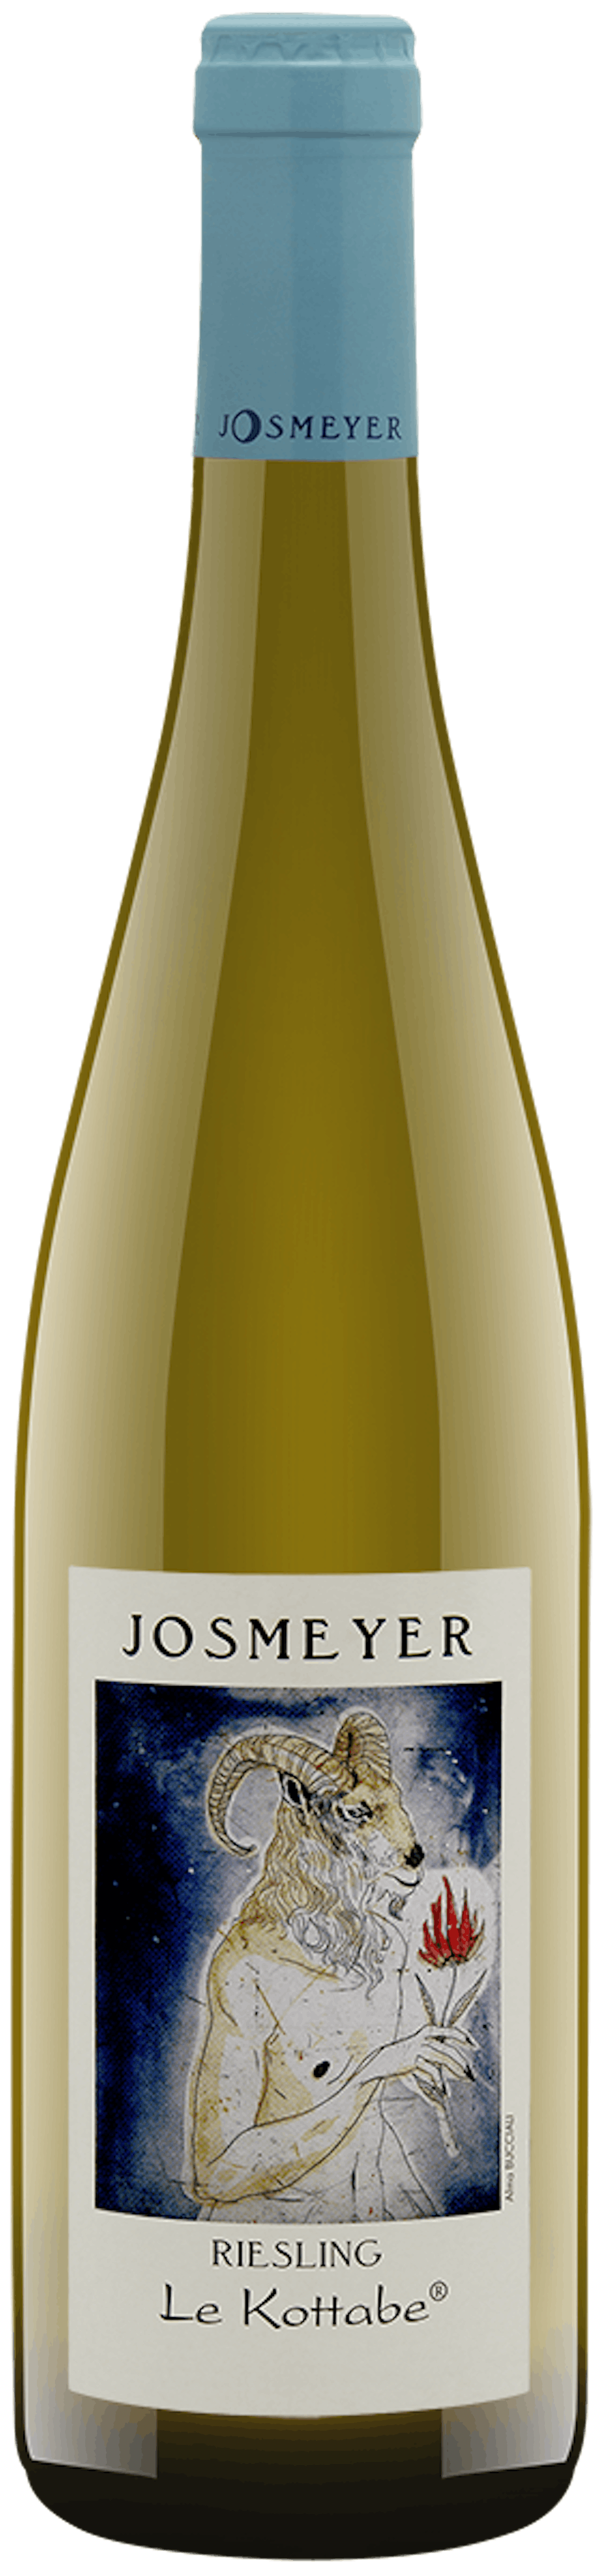 Le Kottabe Riesling